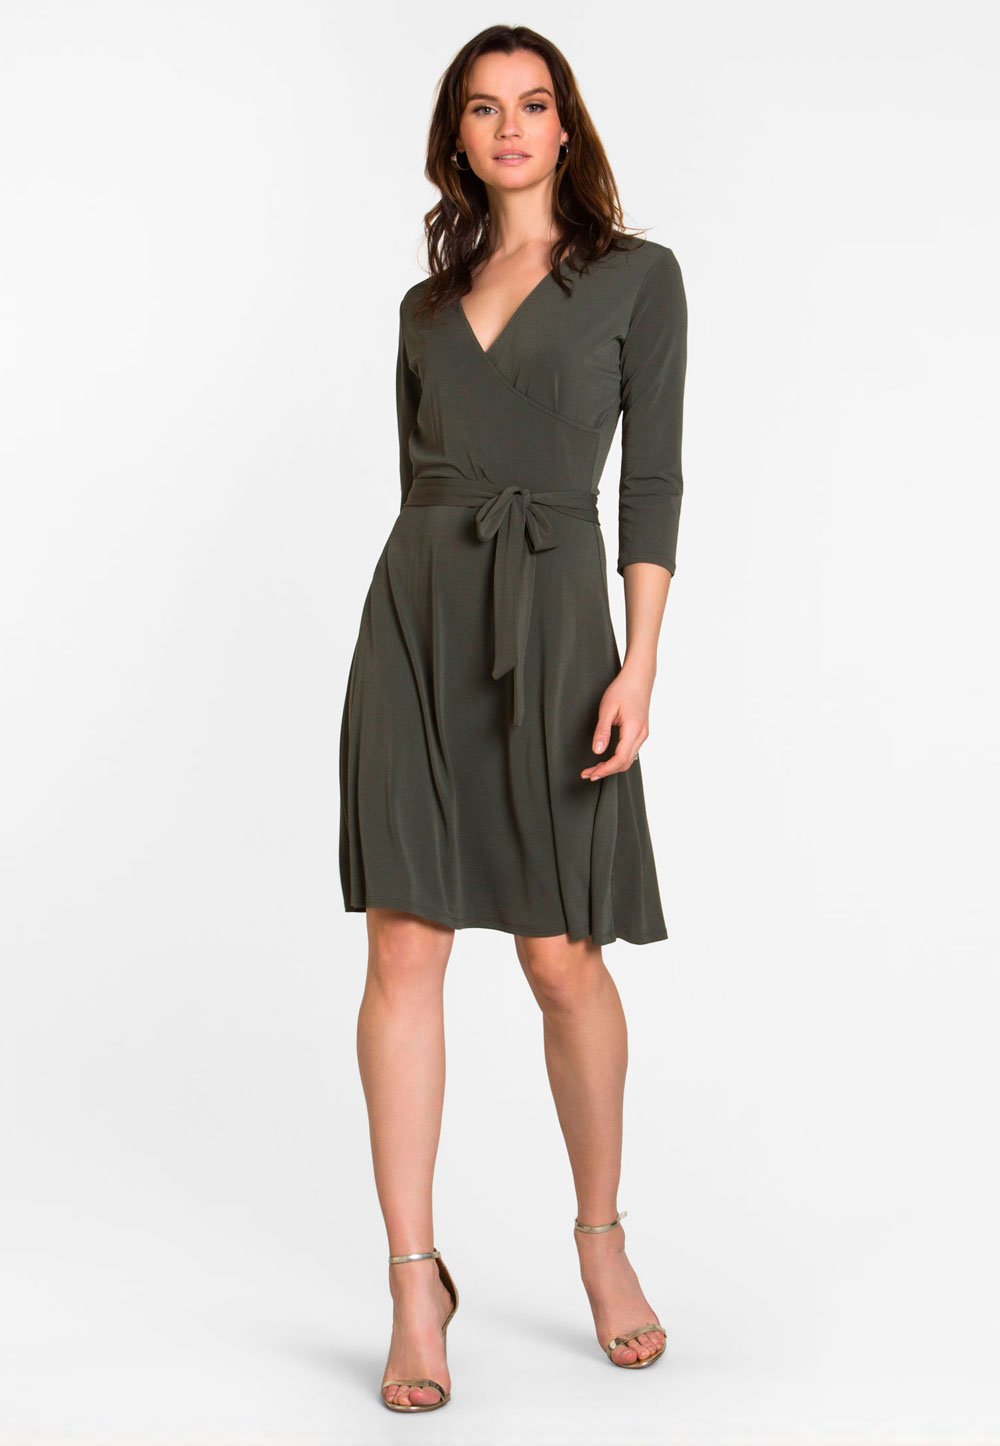 Perfect Wrap Dress  in Crepe Knit Peat Moss Green